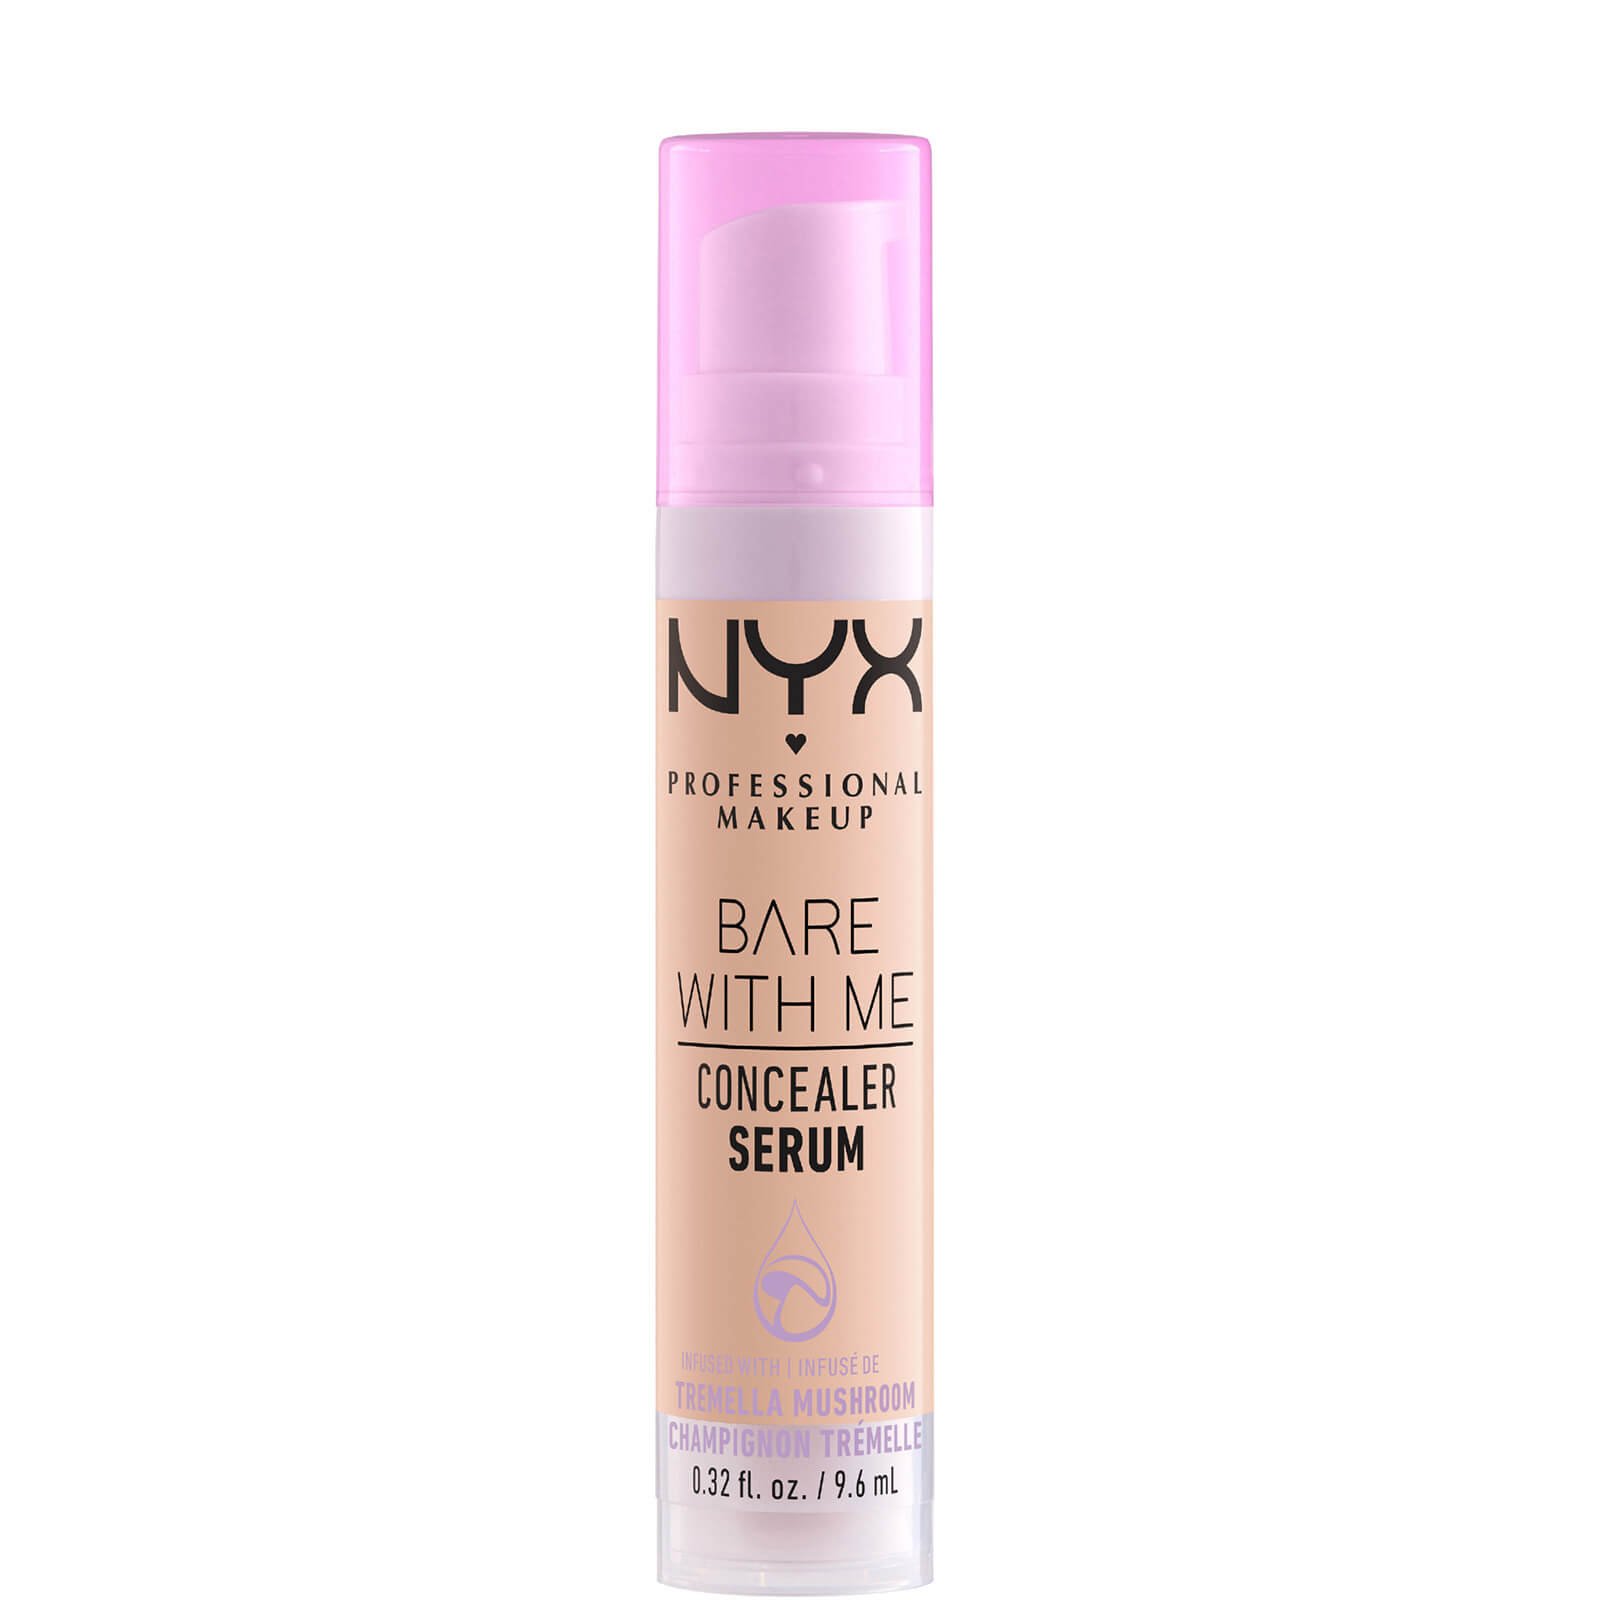 NYX Professional Makeup Bare With Me Concealer Serum 9.6ml (Various Shades) - Light von NYX Professional Makeup